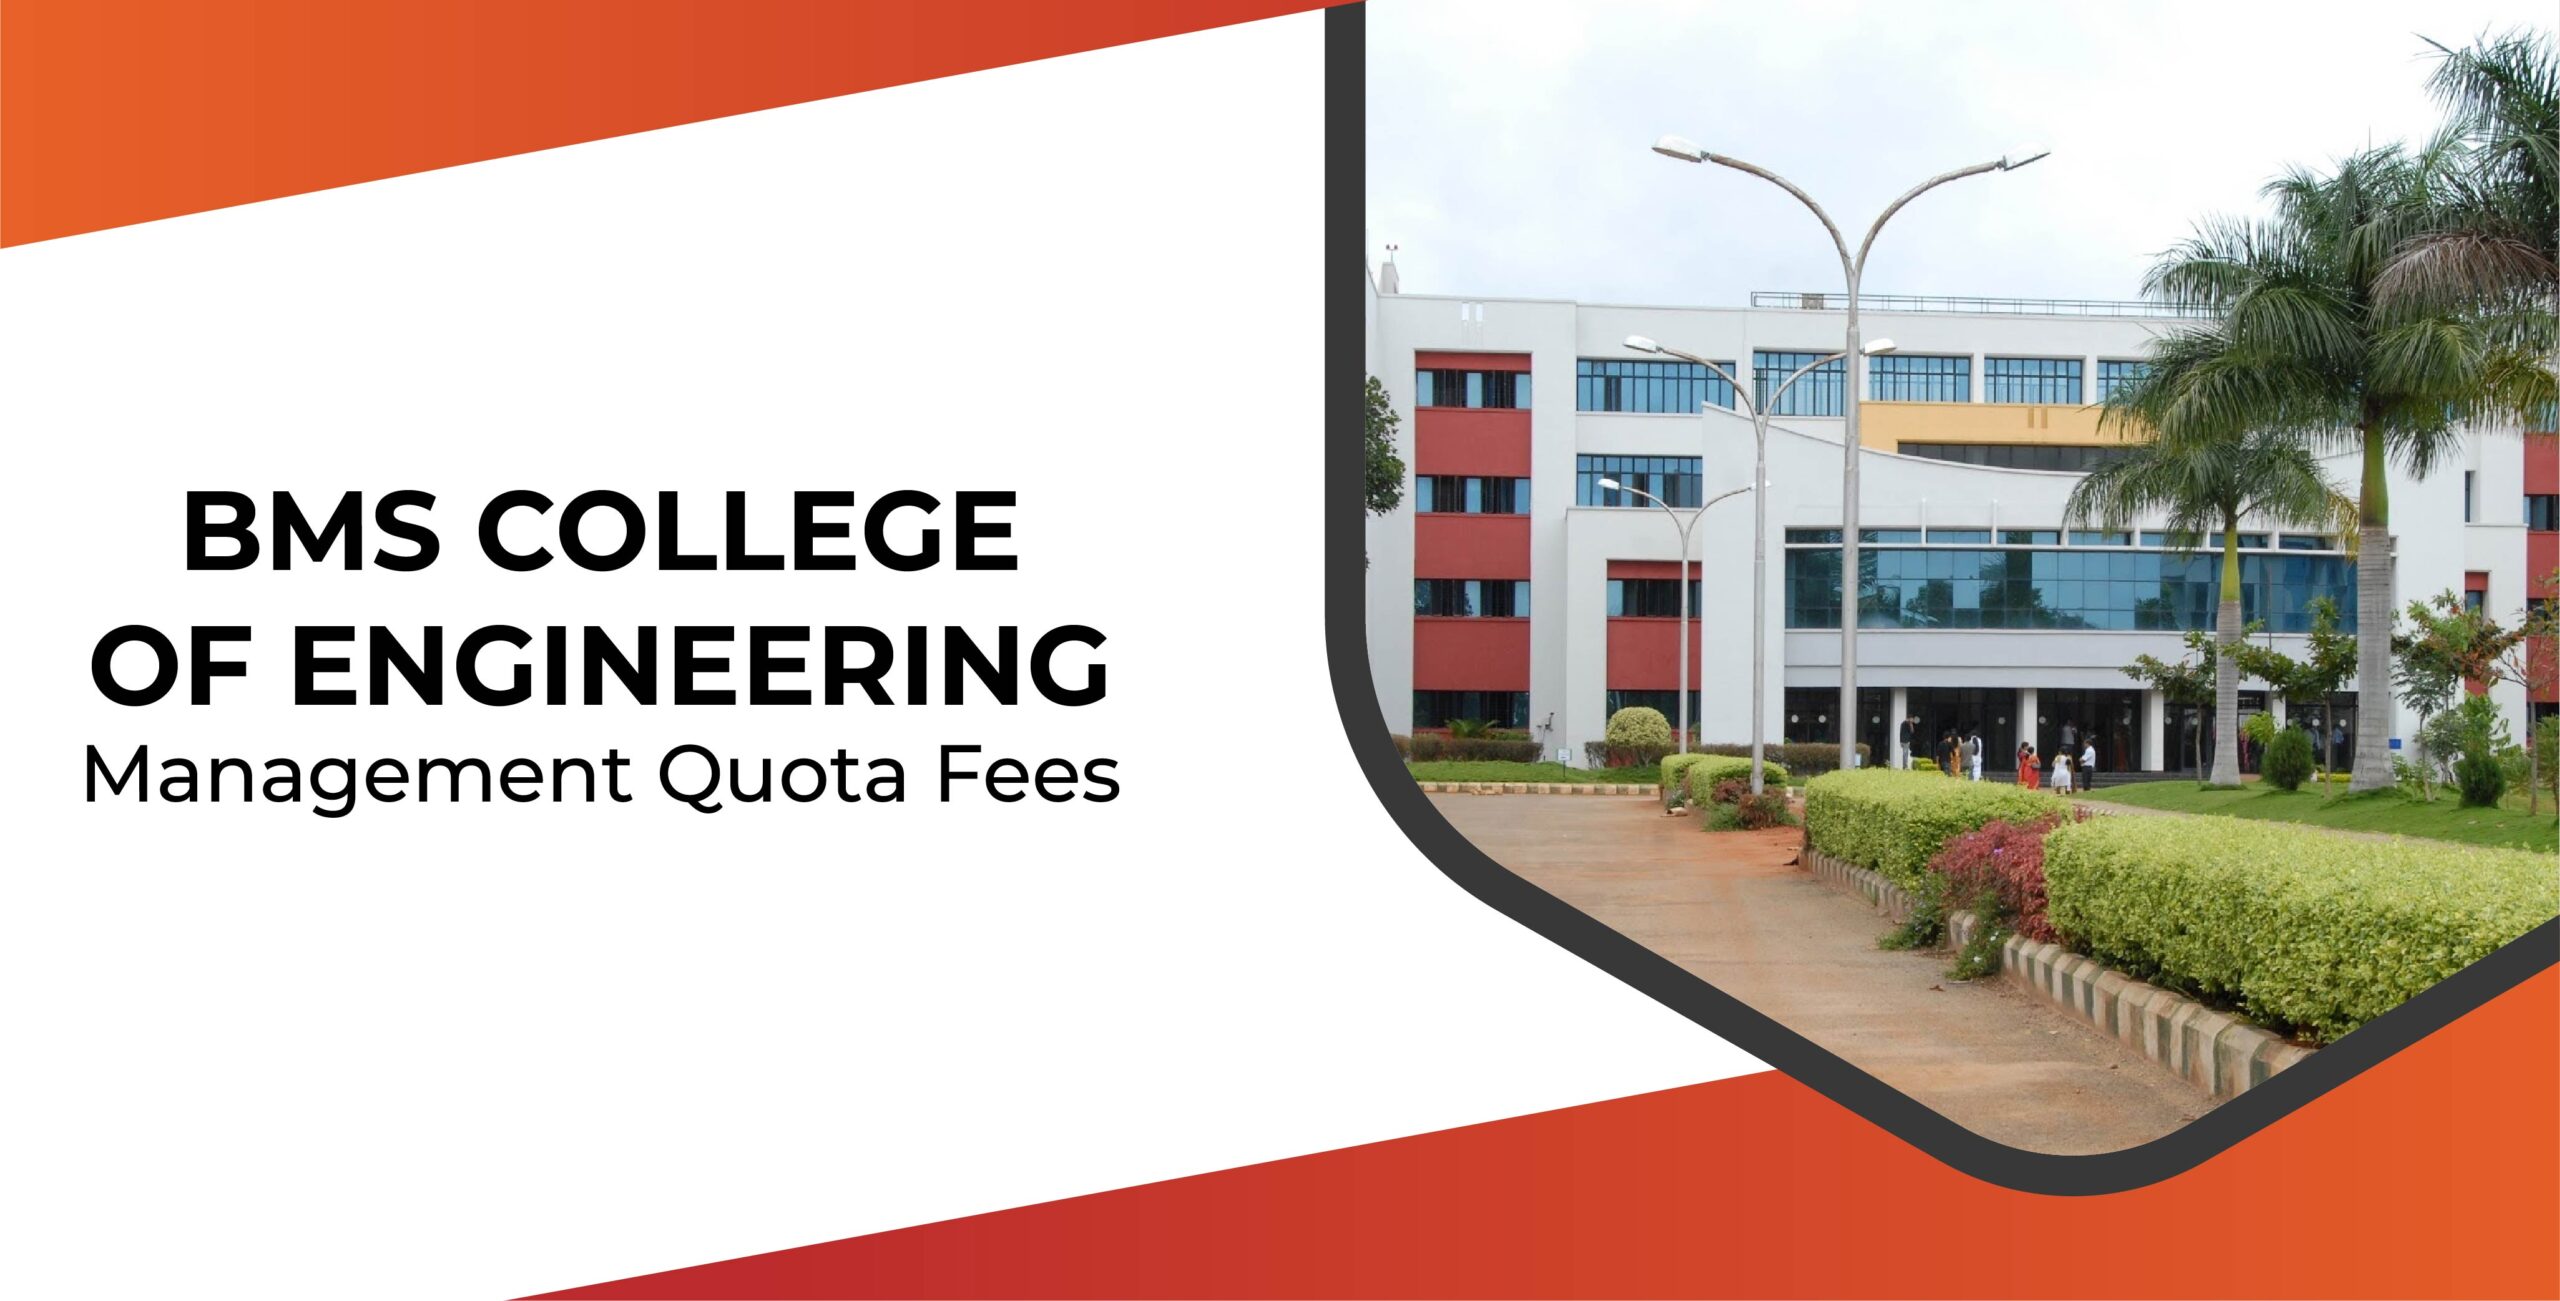 BMS College of Engineering Management Quota Fees